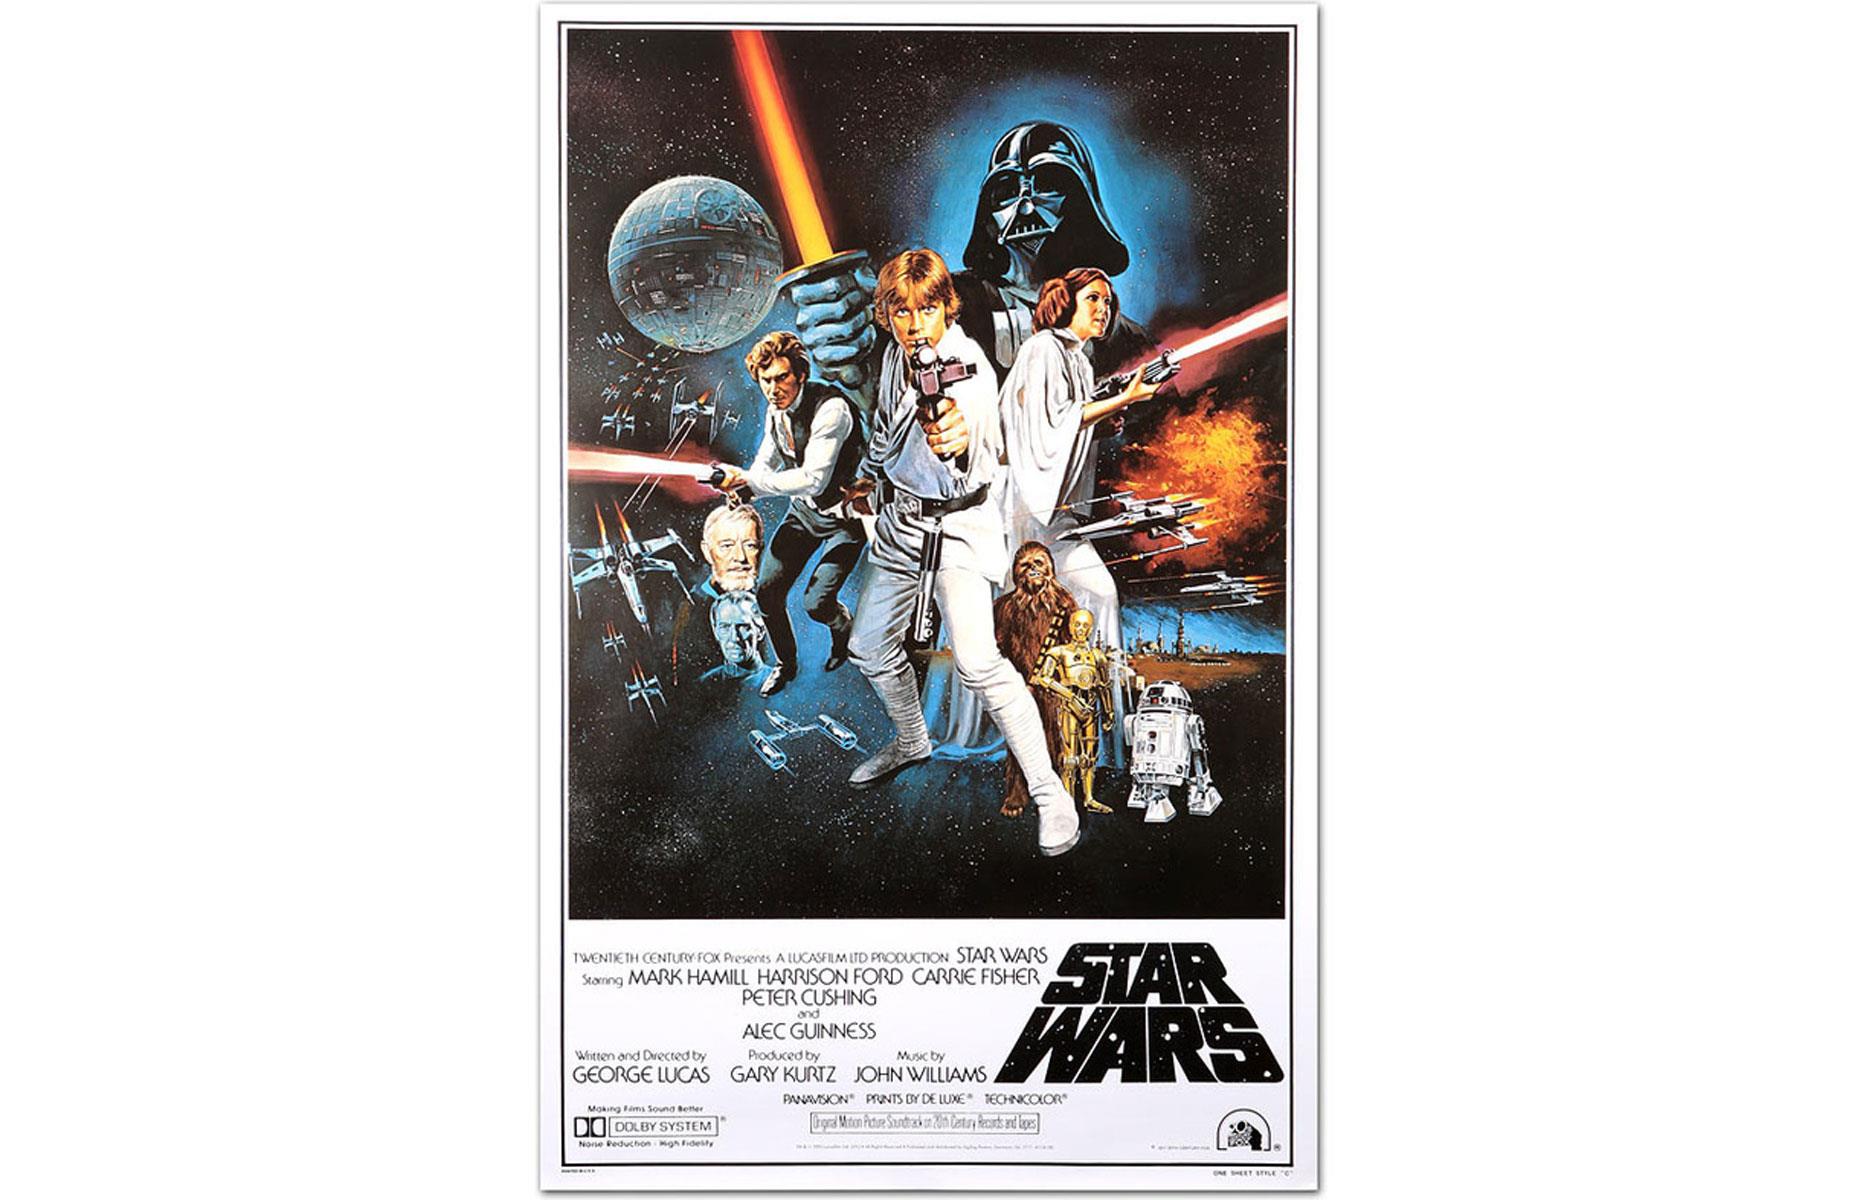 Star Wars (American poster, 1977): up to $2,600 (£1.9k)